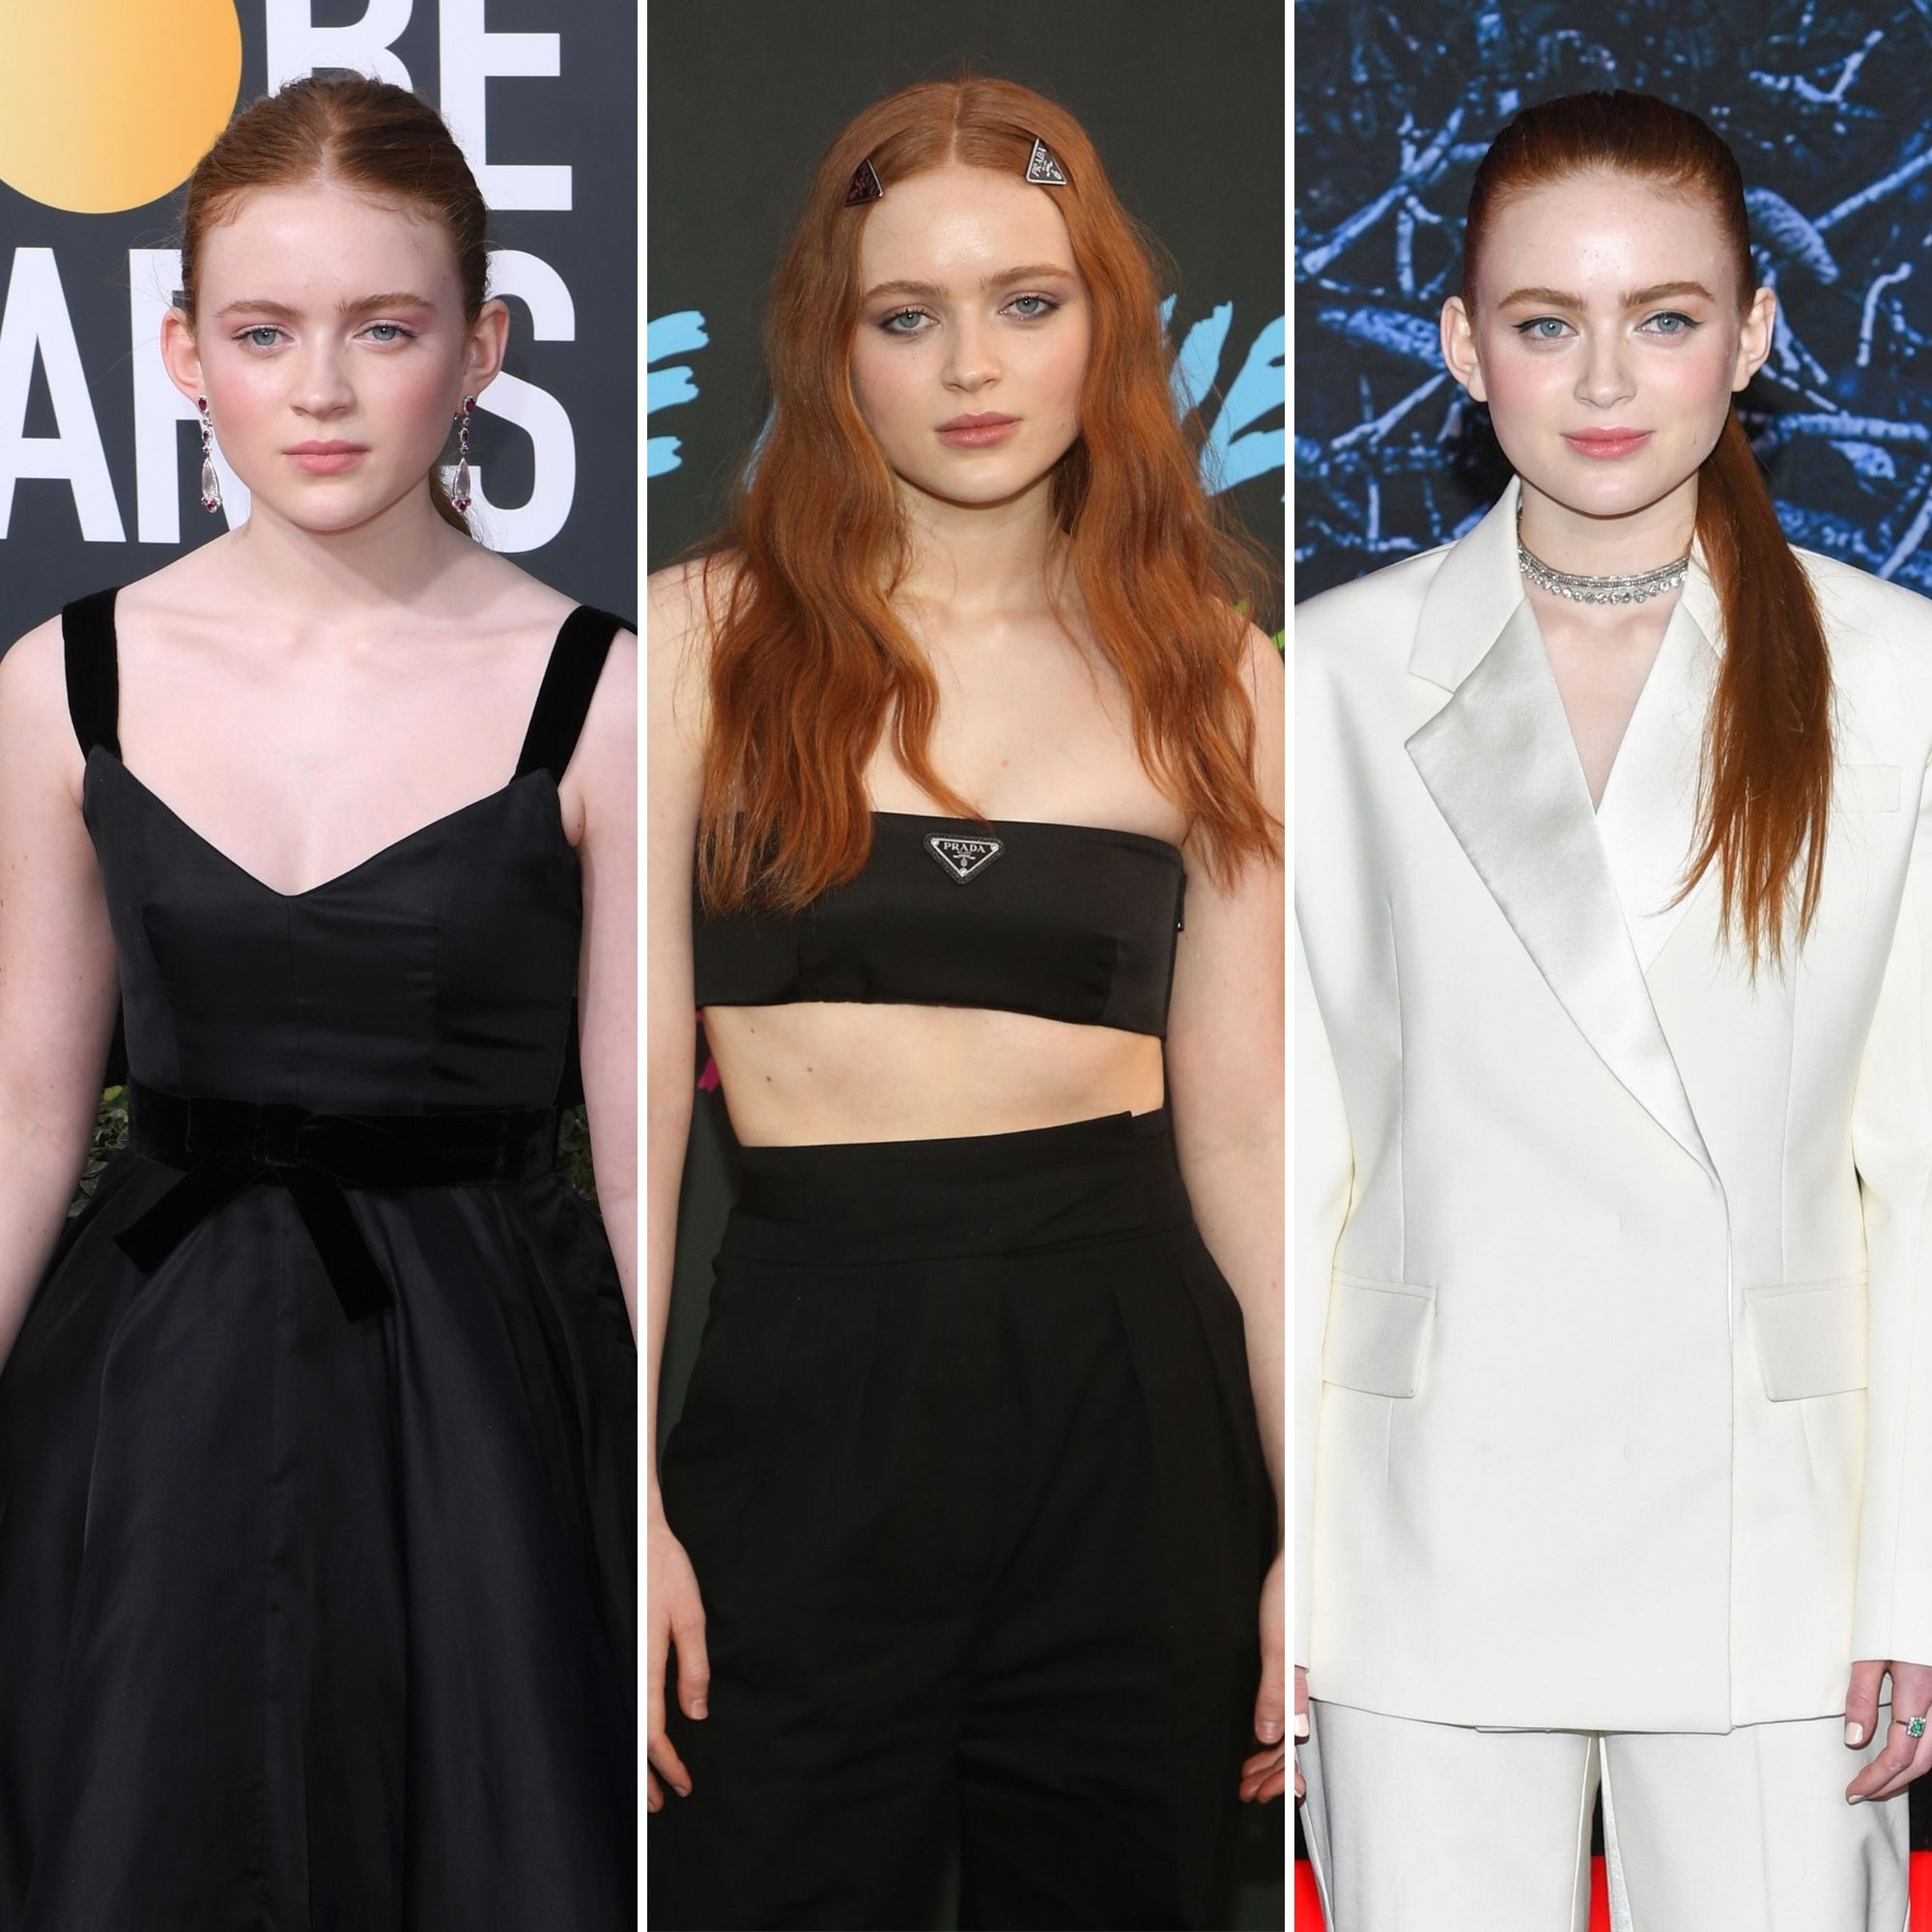 Sadie Sink's Transformation Photos From 'Stranger Things' to Now